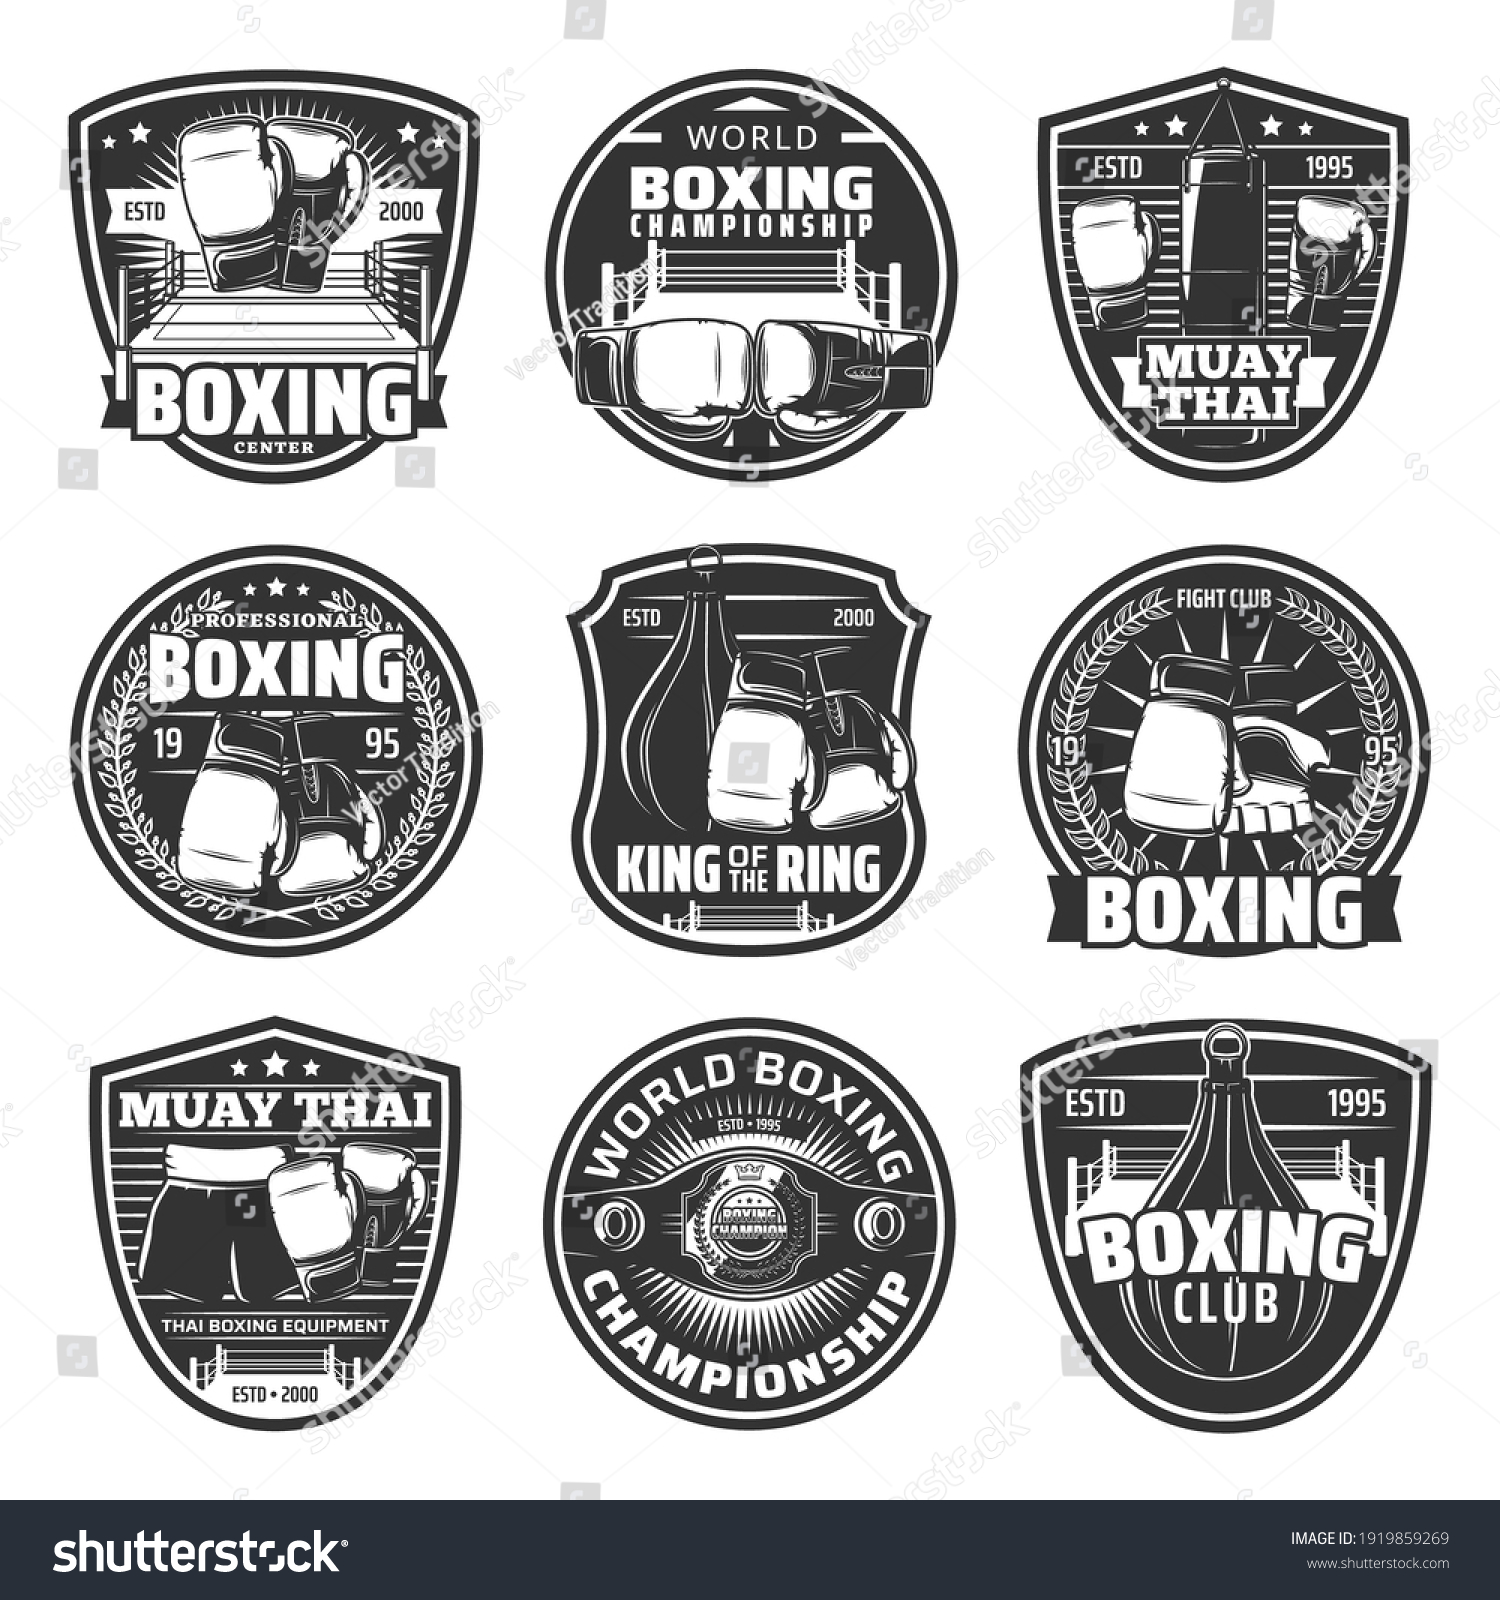 SVG of Boxing and muay thai single combats vector icons. Thailand kickboxing martial arts, fighting sport, muay thai boxers club or training center. Championship belt, boxing gloves, punching bag signs set svg